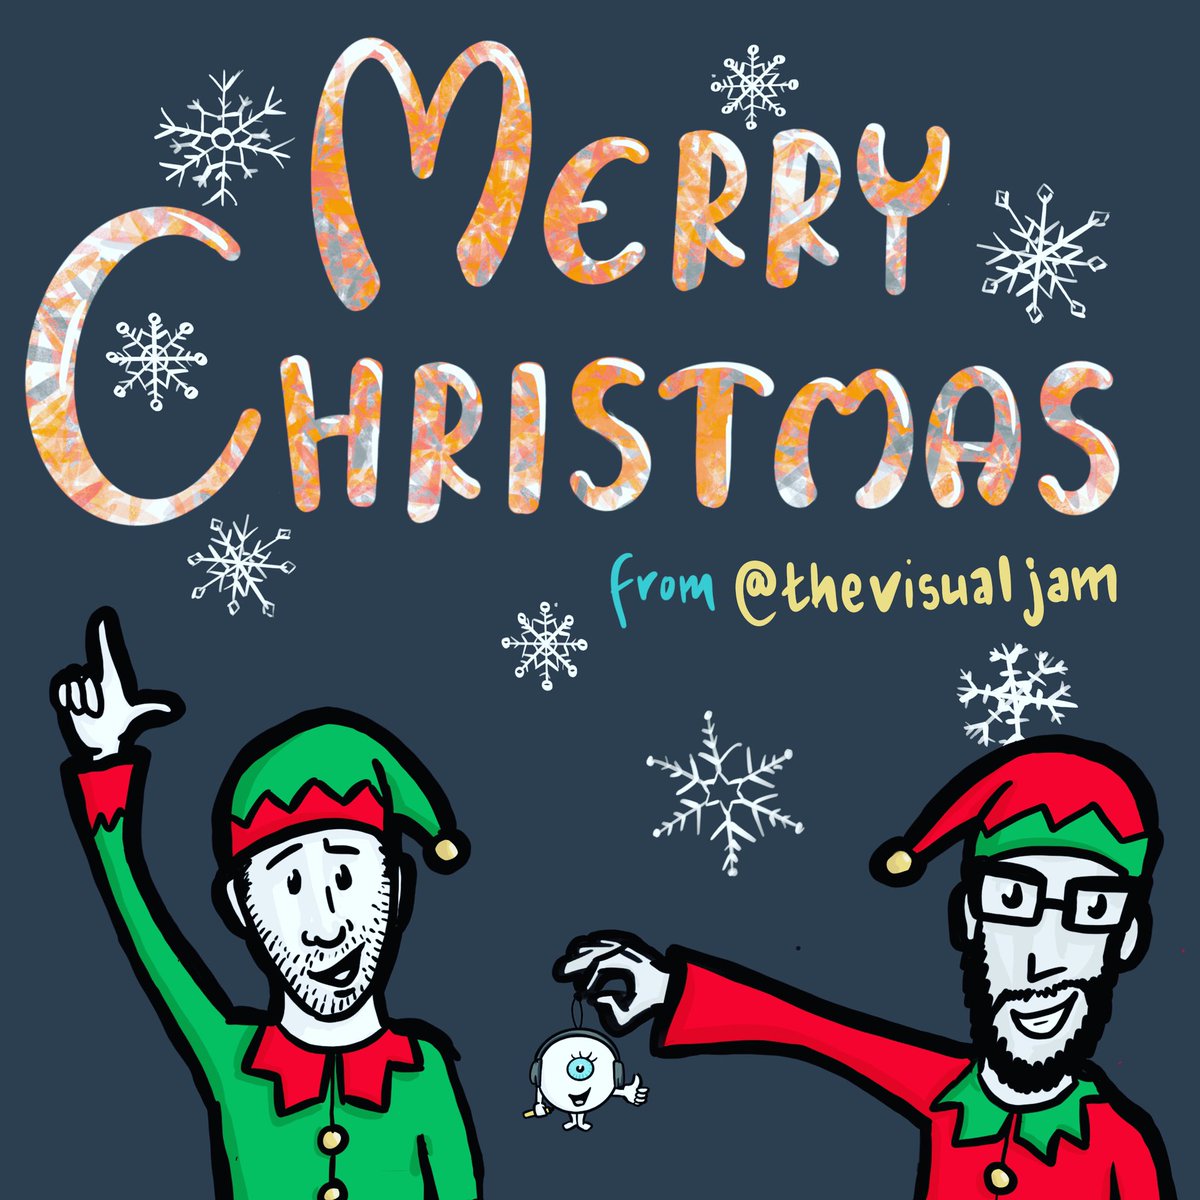 We are looking to our Christmas special of @thevisualjam next Thursday (6pm UK time) with @andydevale from @workvisible! Why not join us for some festive fun and visual games. Kids welcome 🎄 ⭐️ 🎅 . . . . Link to Meetup in bio #visualthinking #sketchnotes #doodling #xmas